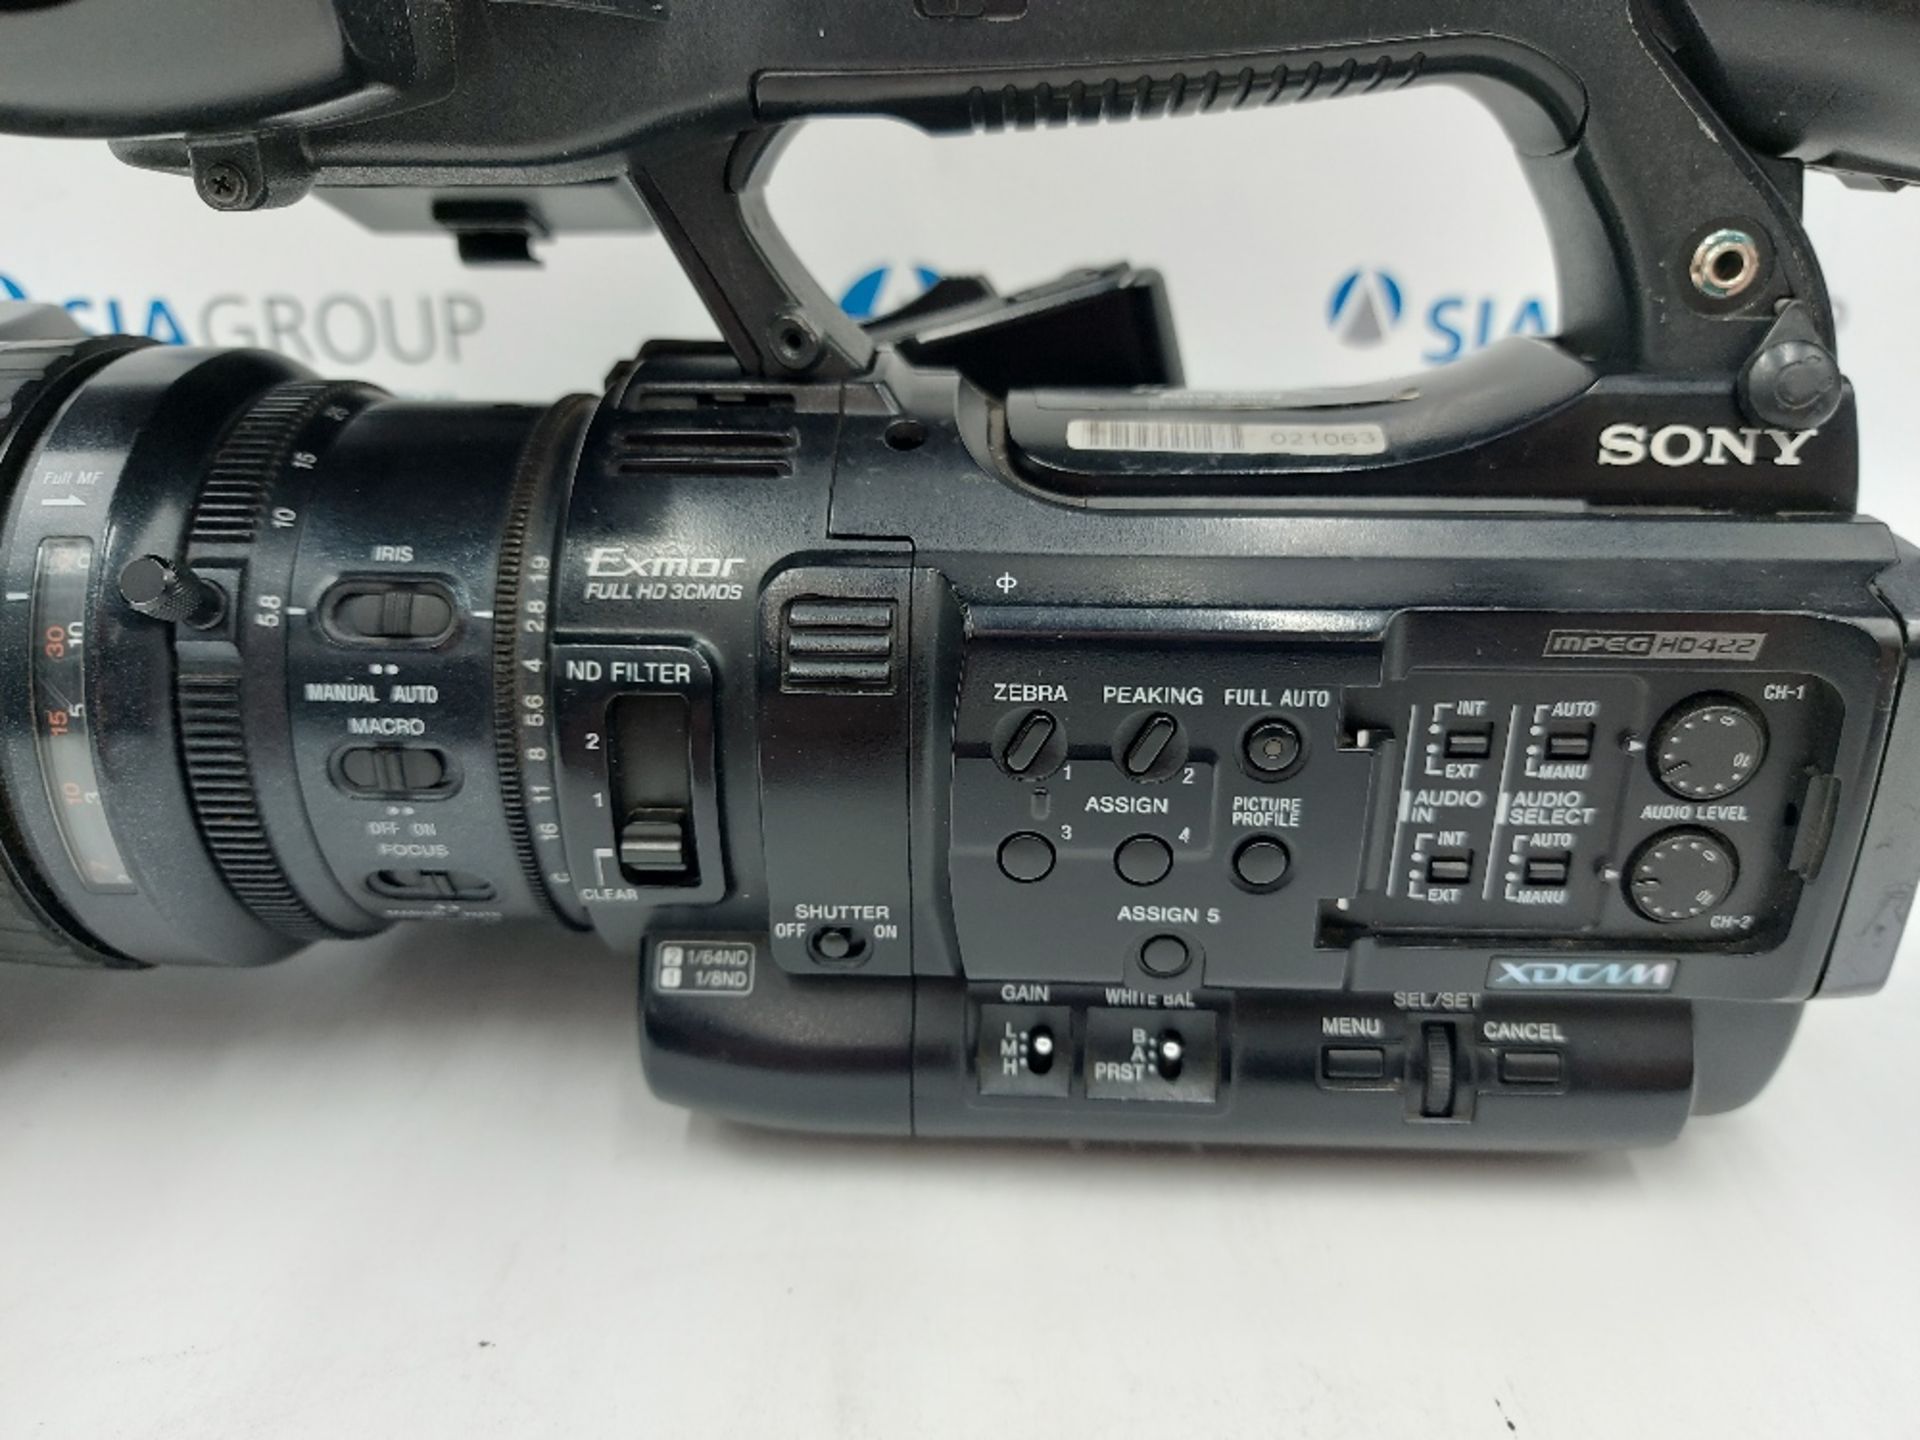 Sony PMW-200 Camcorder Kit - Image 5 of 14